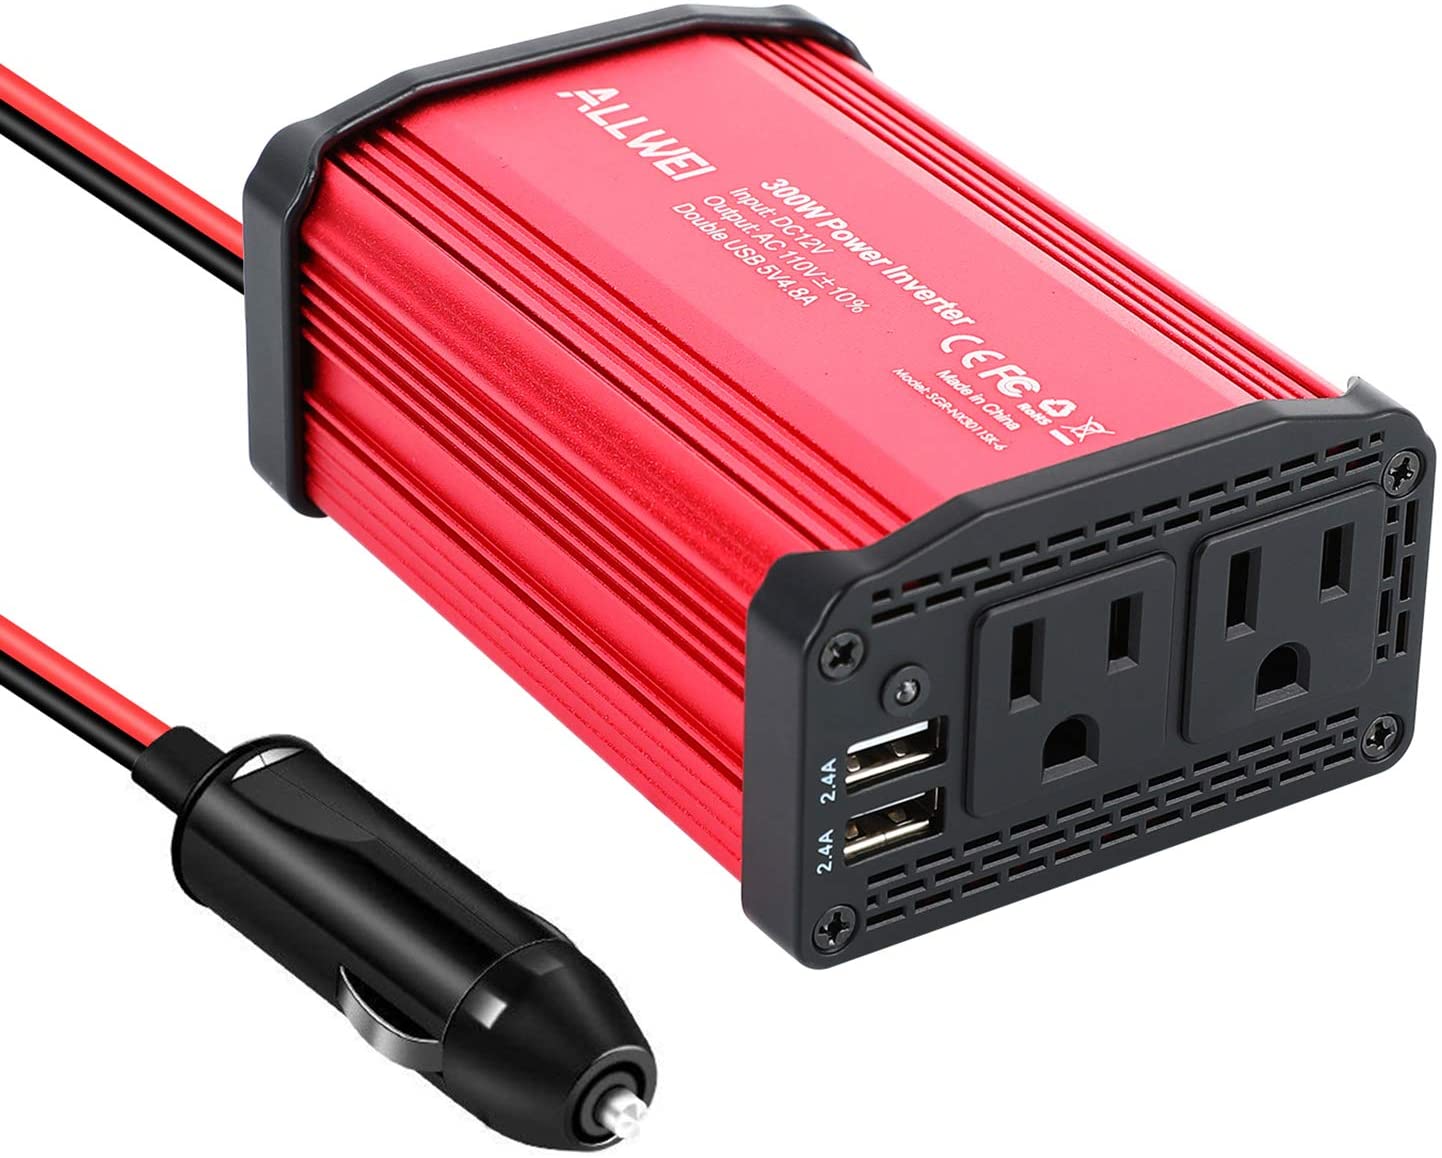 Allwei 300W Car Power Inverter DC 12V to 110V AC Converter 4.8A Dual USB Charging Ports Car Charger Adapter (Red)